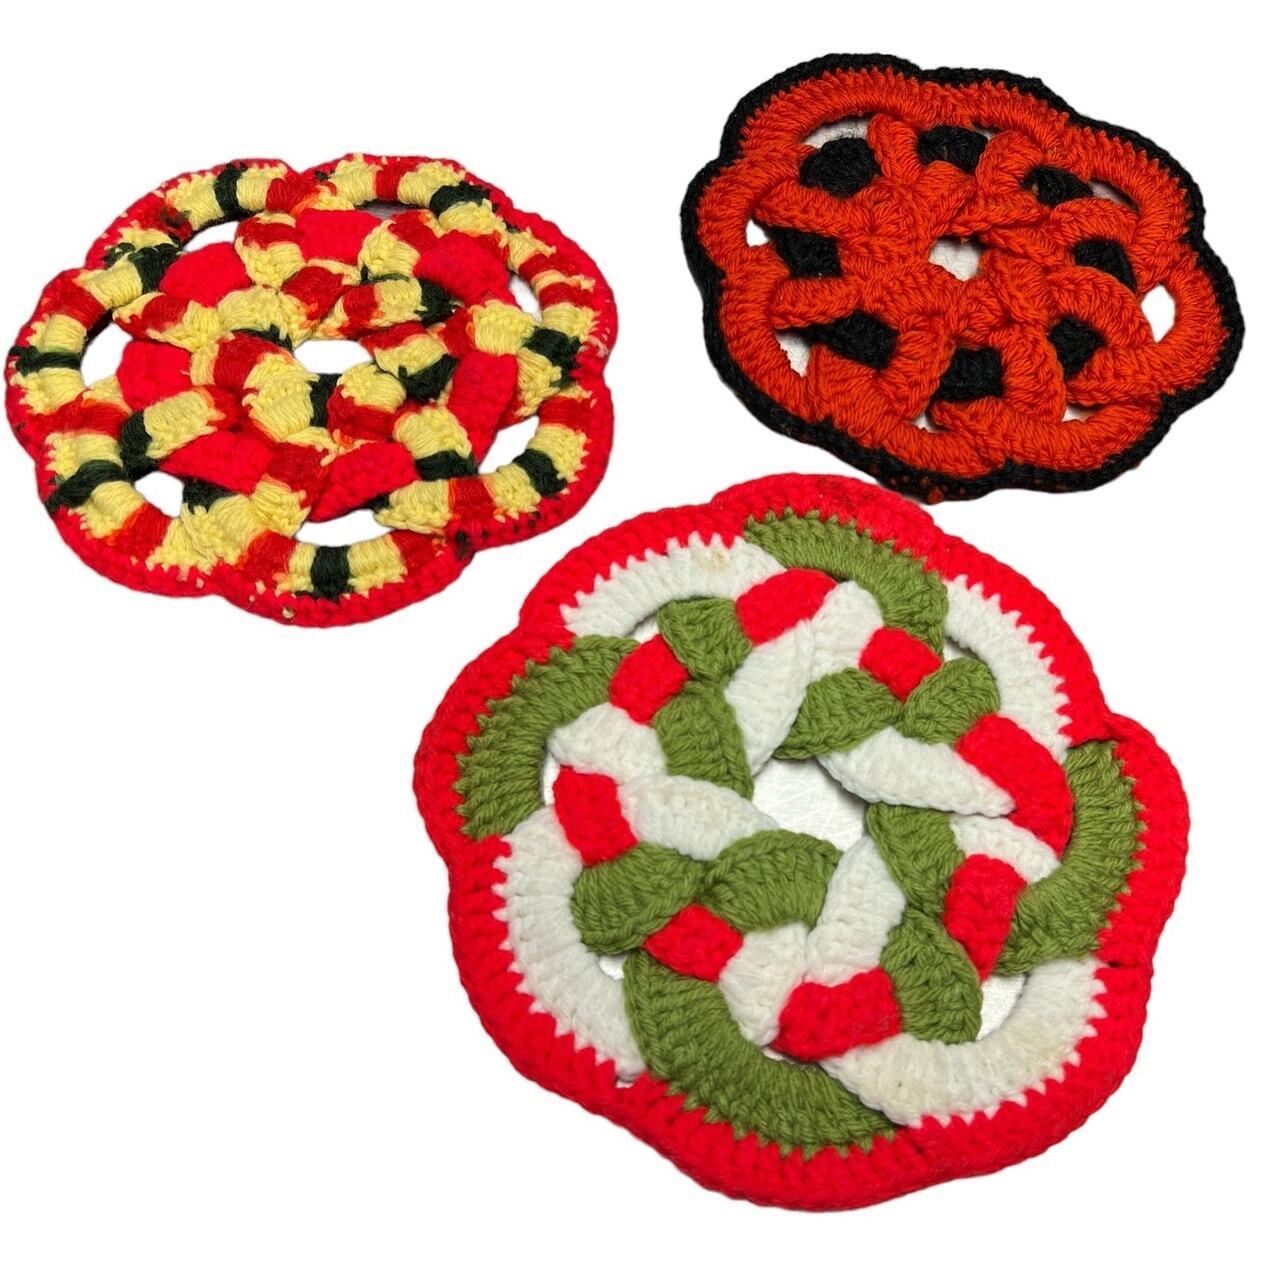 Retro Handmade Crocheted Hot Pads Trivets Surface Protectors Granny Cottage Art